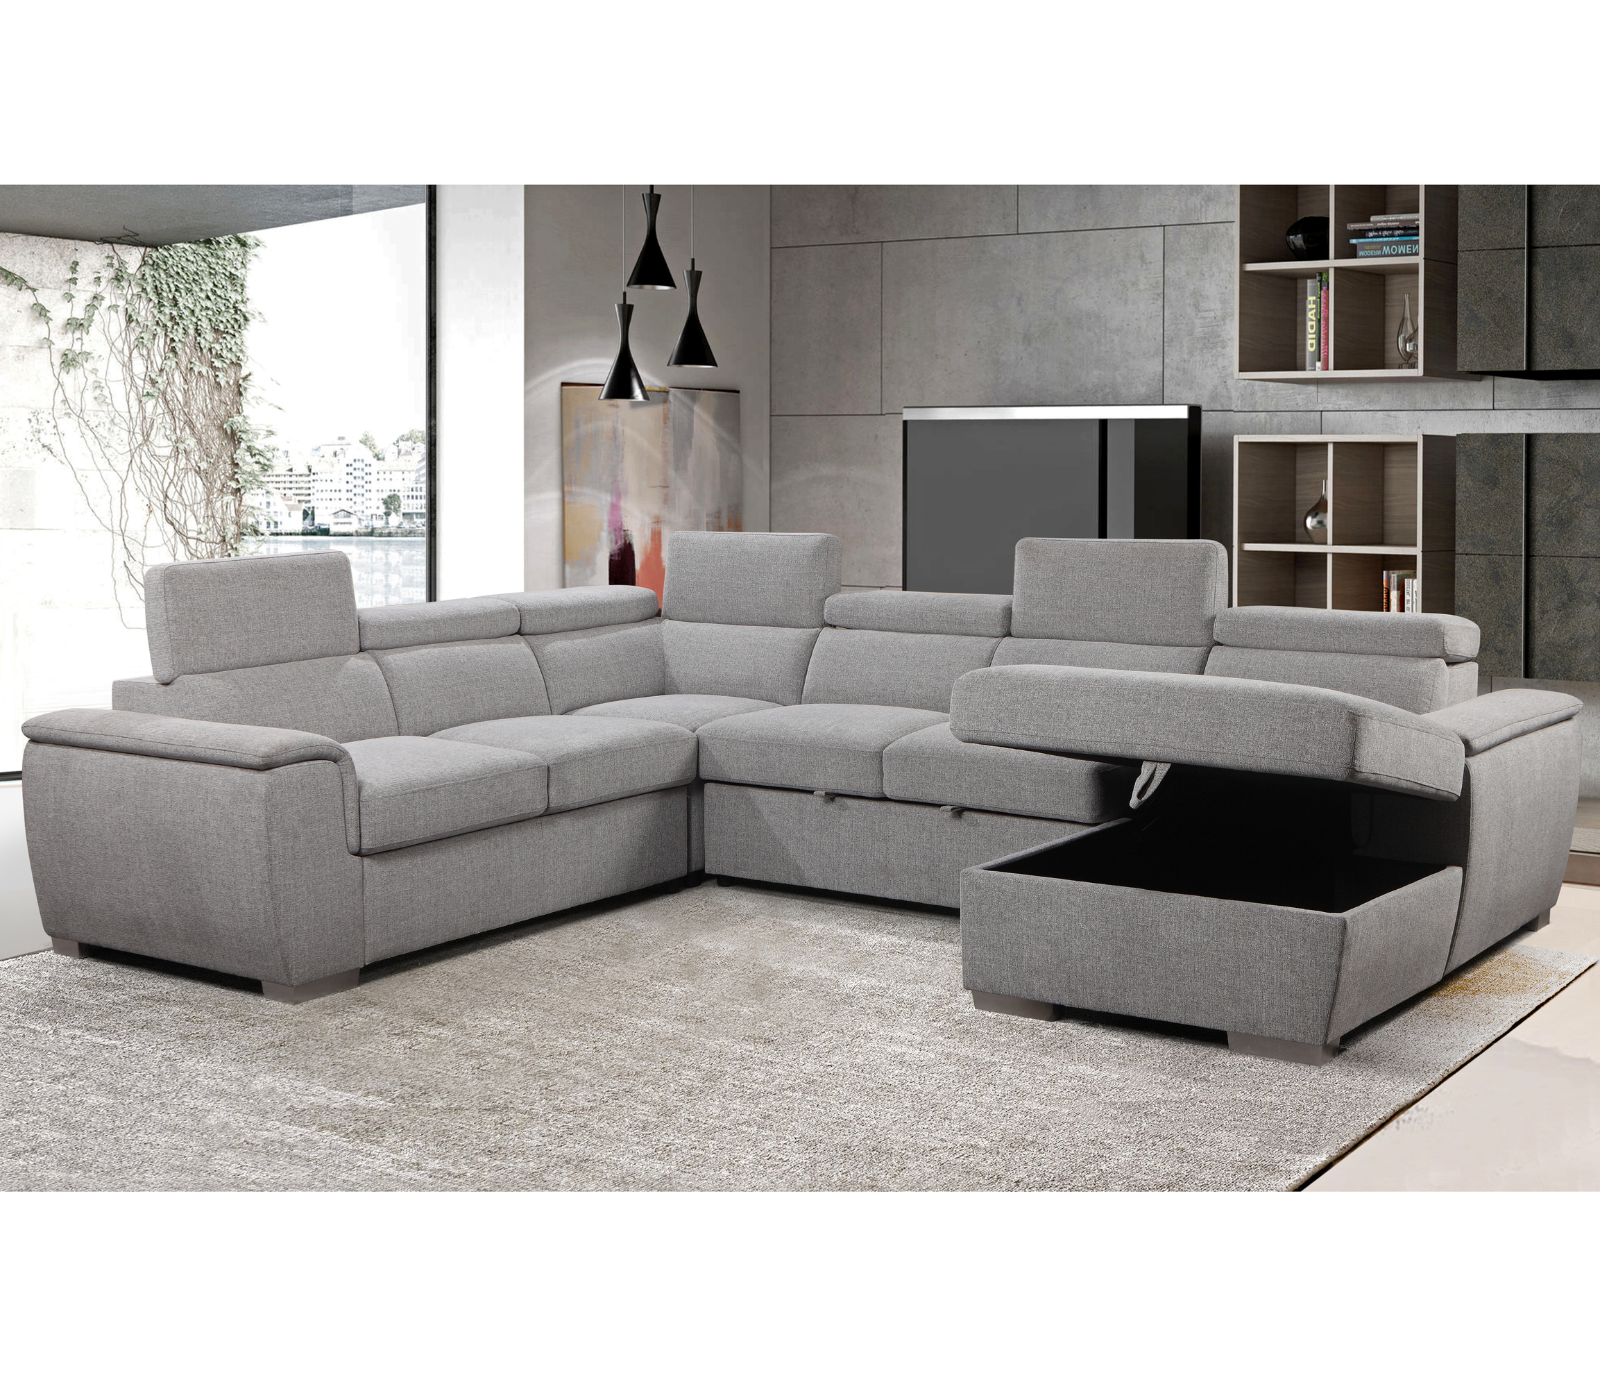 Eddie 4 Piece Sectional w/ Pull-Out Sleeper - Light Grey Fabric